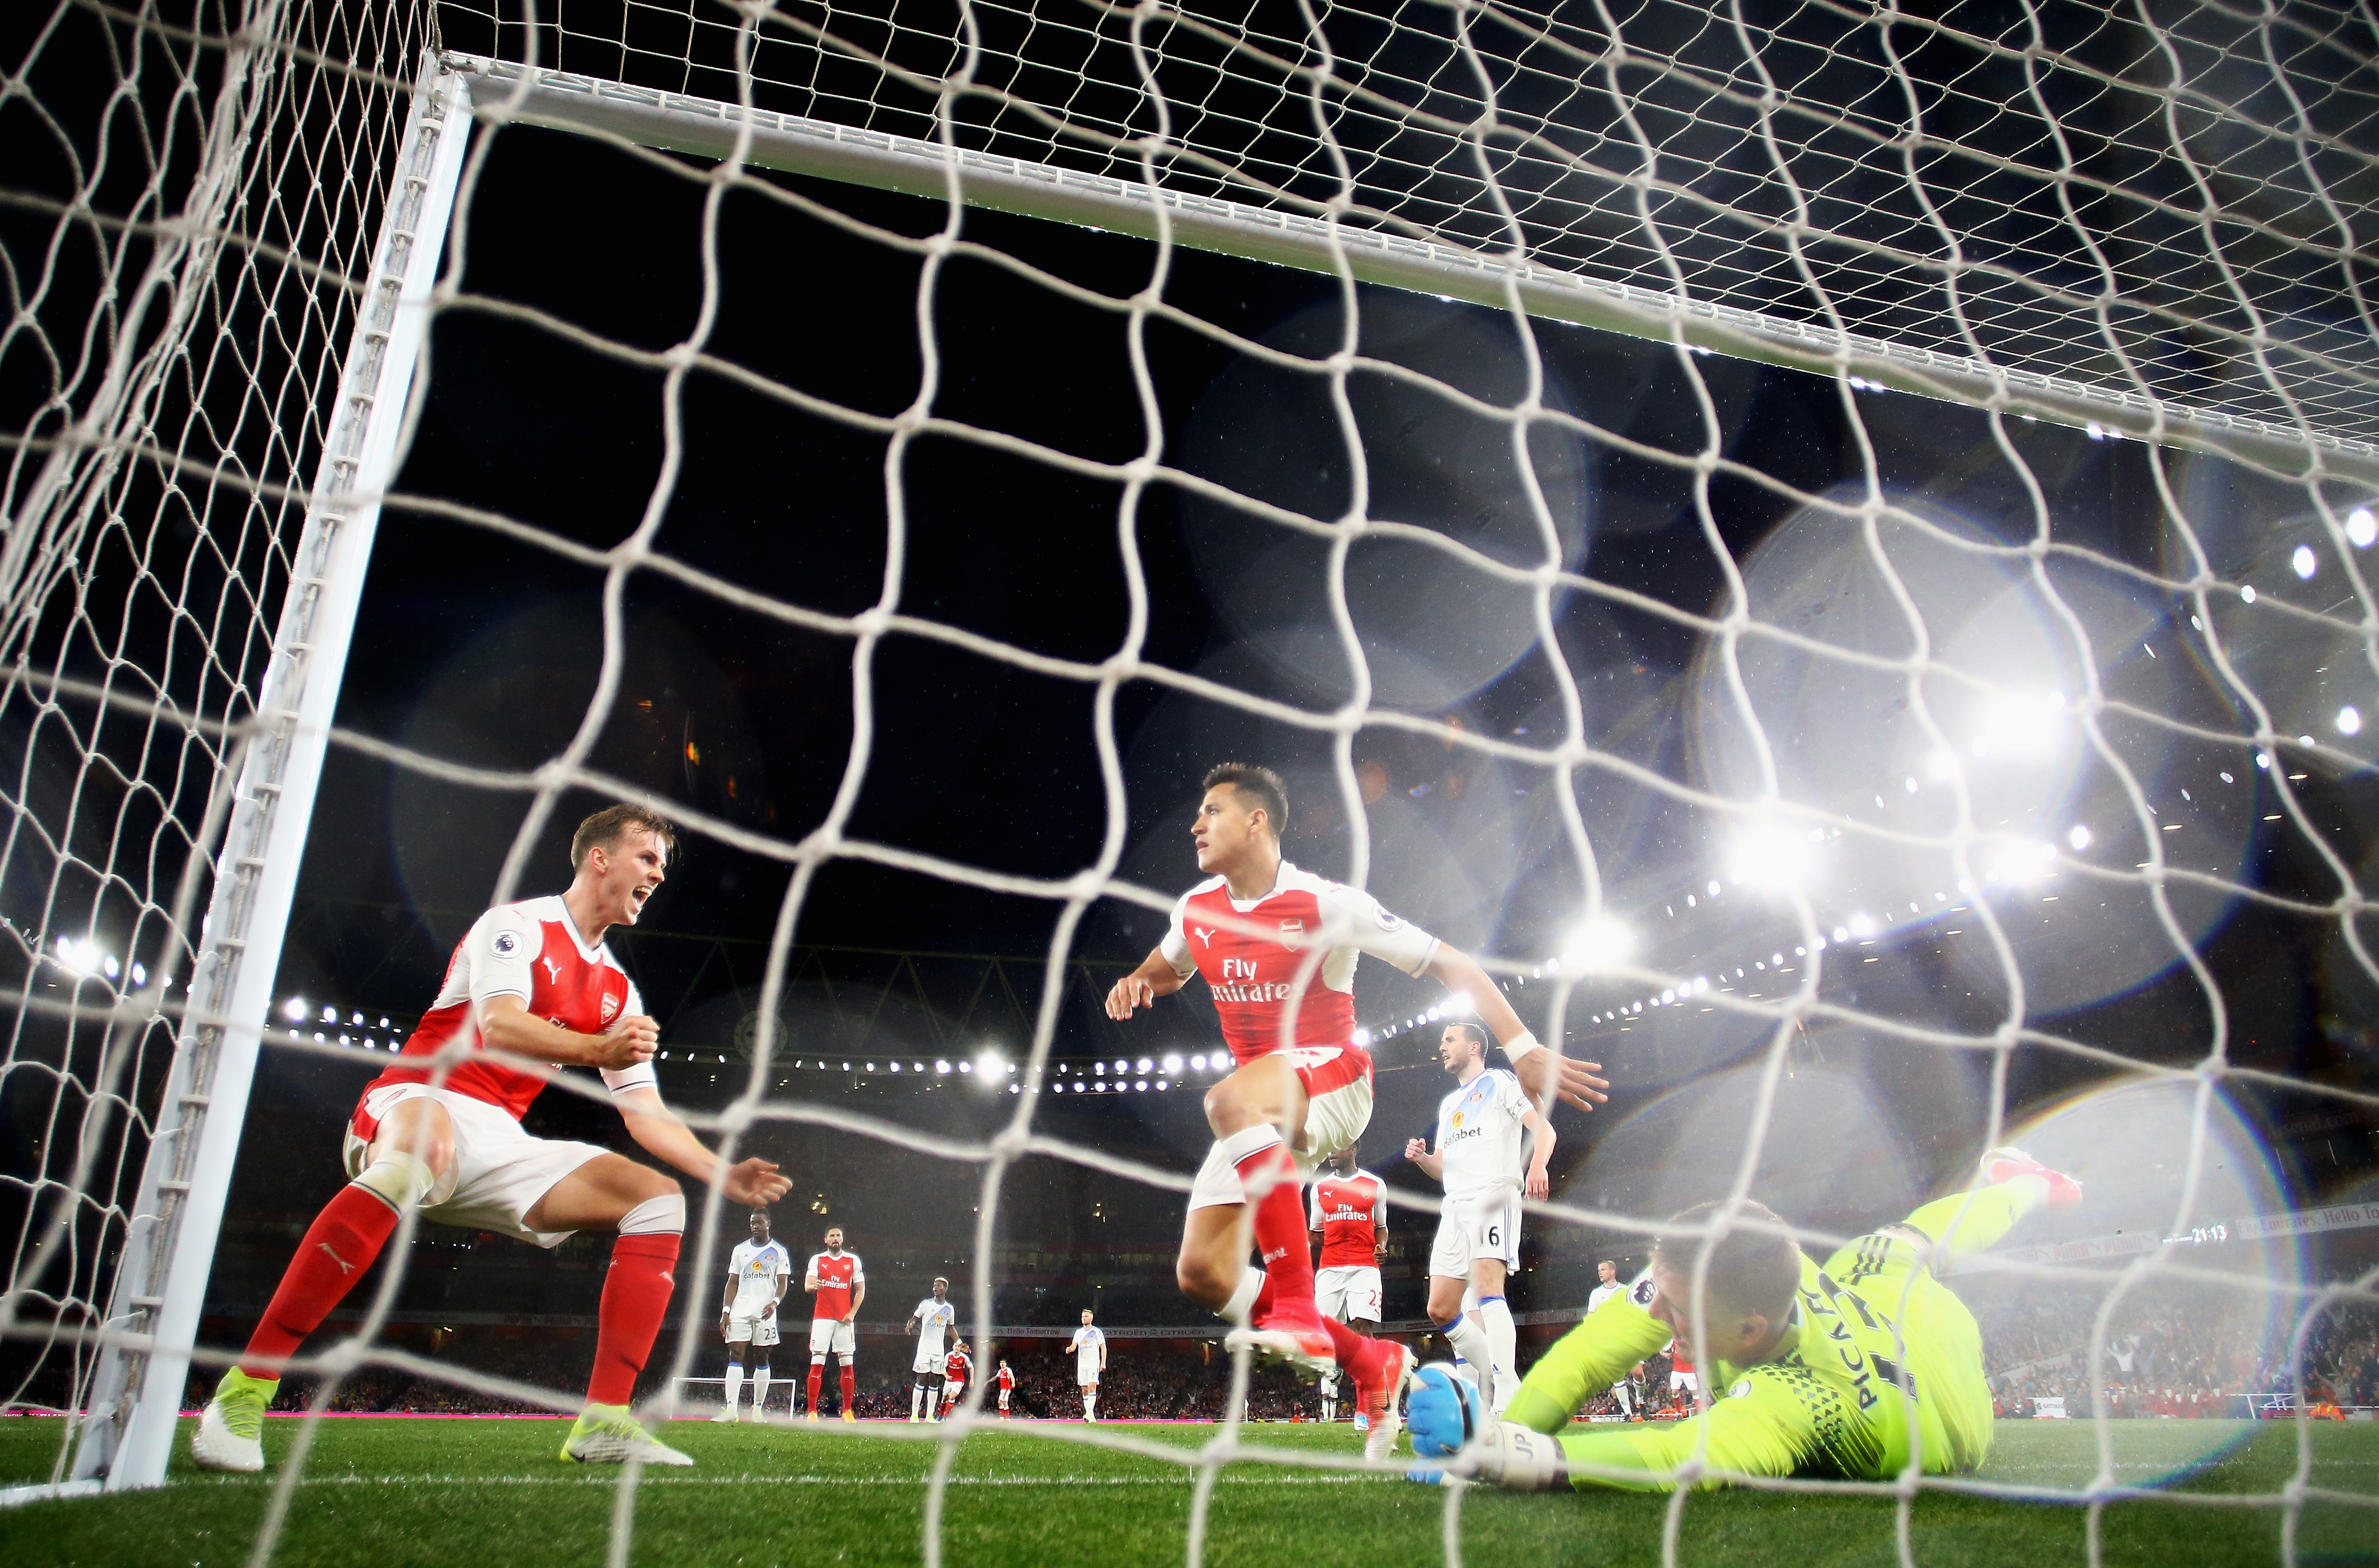 LONDON, ENGLAND - MAY 16:  Alexis Sanchez of Arsenal scores his sides first goal past Jordan Pickford of Sunderland during the Premier League match between Arsenal and Sunderland at Emirates Stadium on May 16, 2017 in London, England.  (Photo by Richard Heathcote/Getty Images)